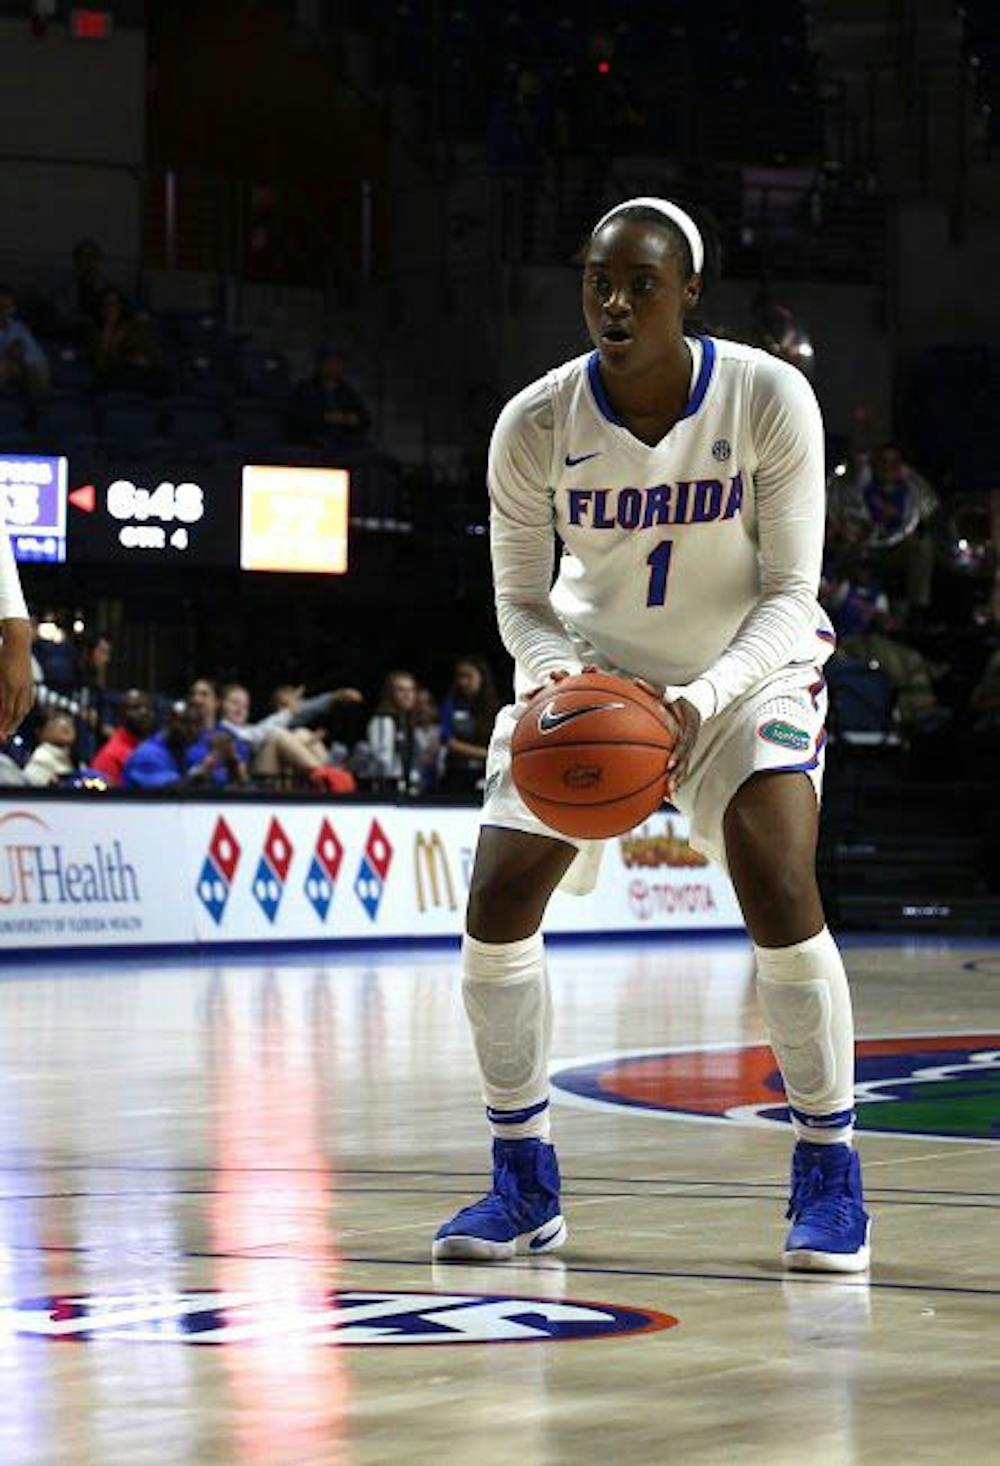 <p>UF forward Ronni Williams prepares to shoot a free throw during Florida's 84-75 loss to Tennessee on Jan. 26, 2017, in the O'Connell Center.</p>